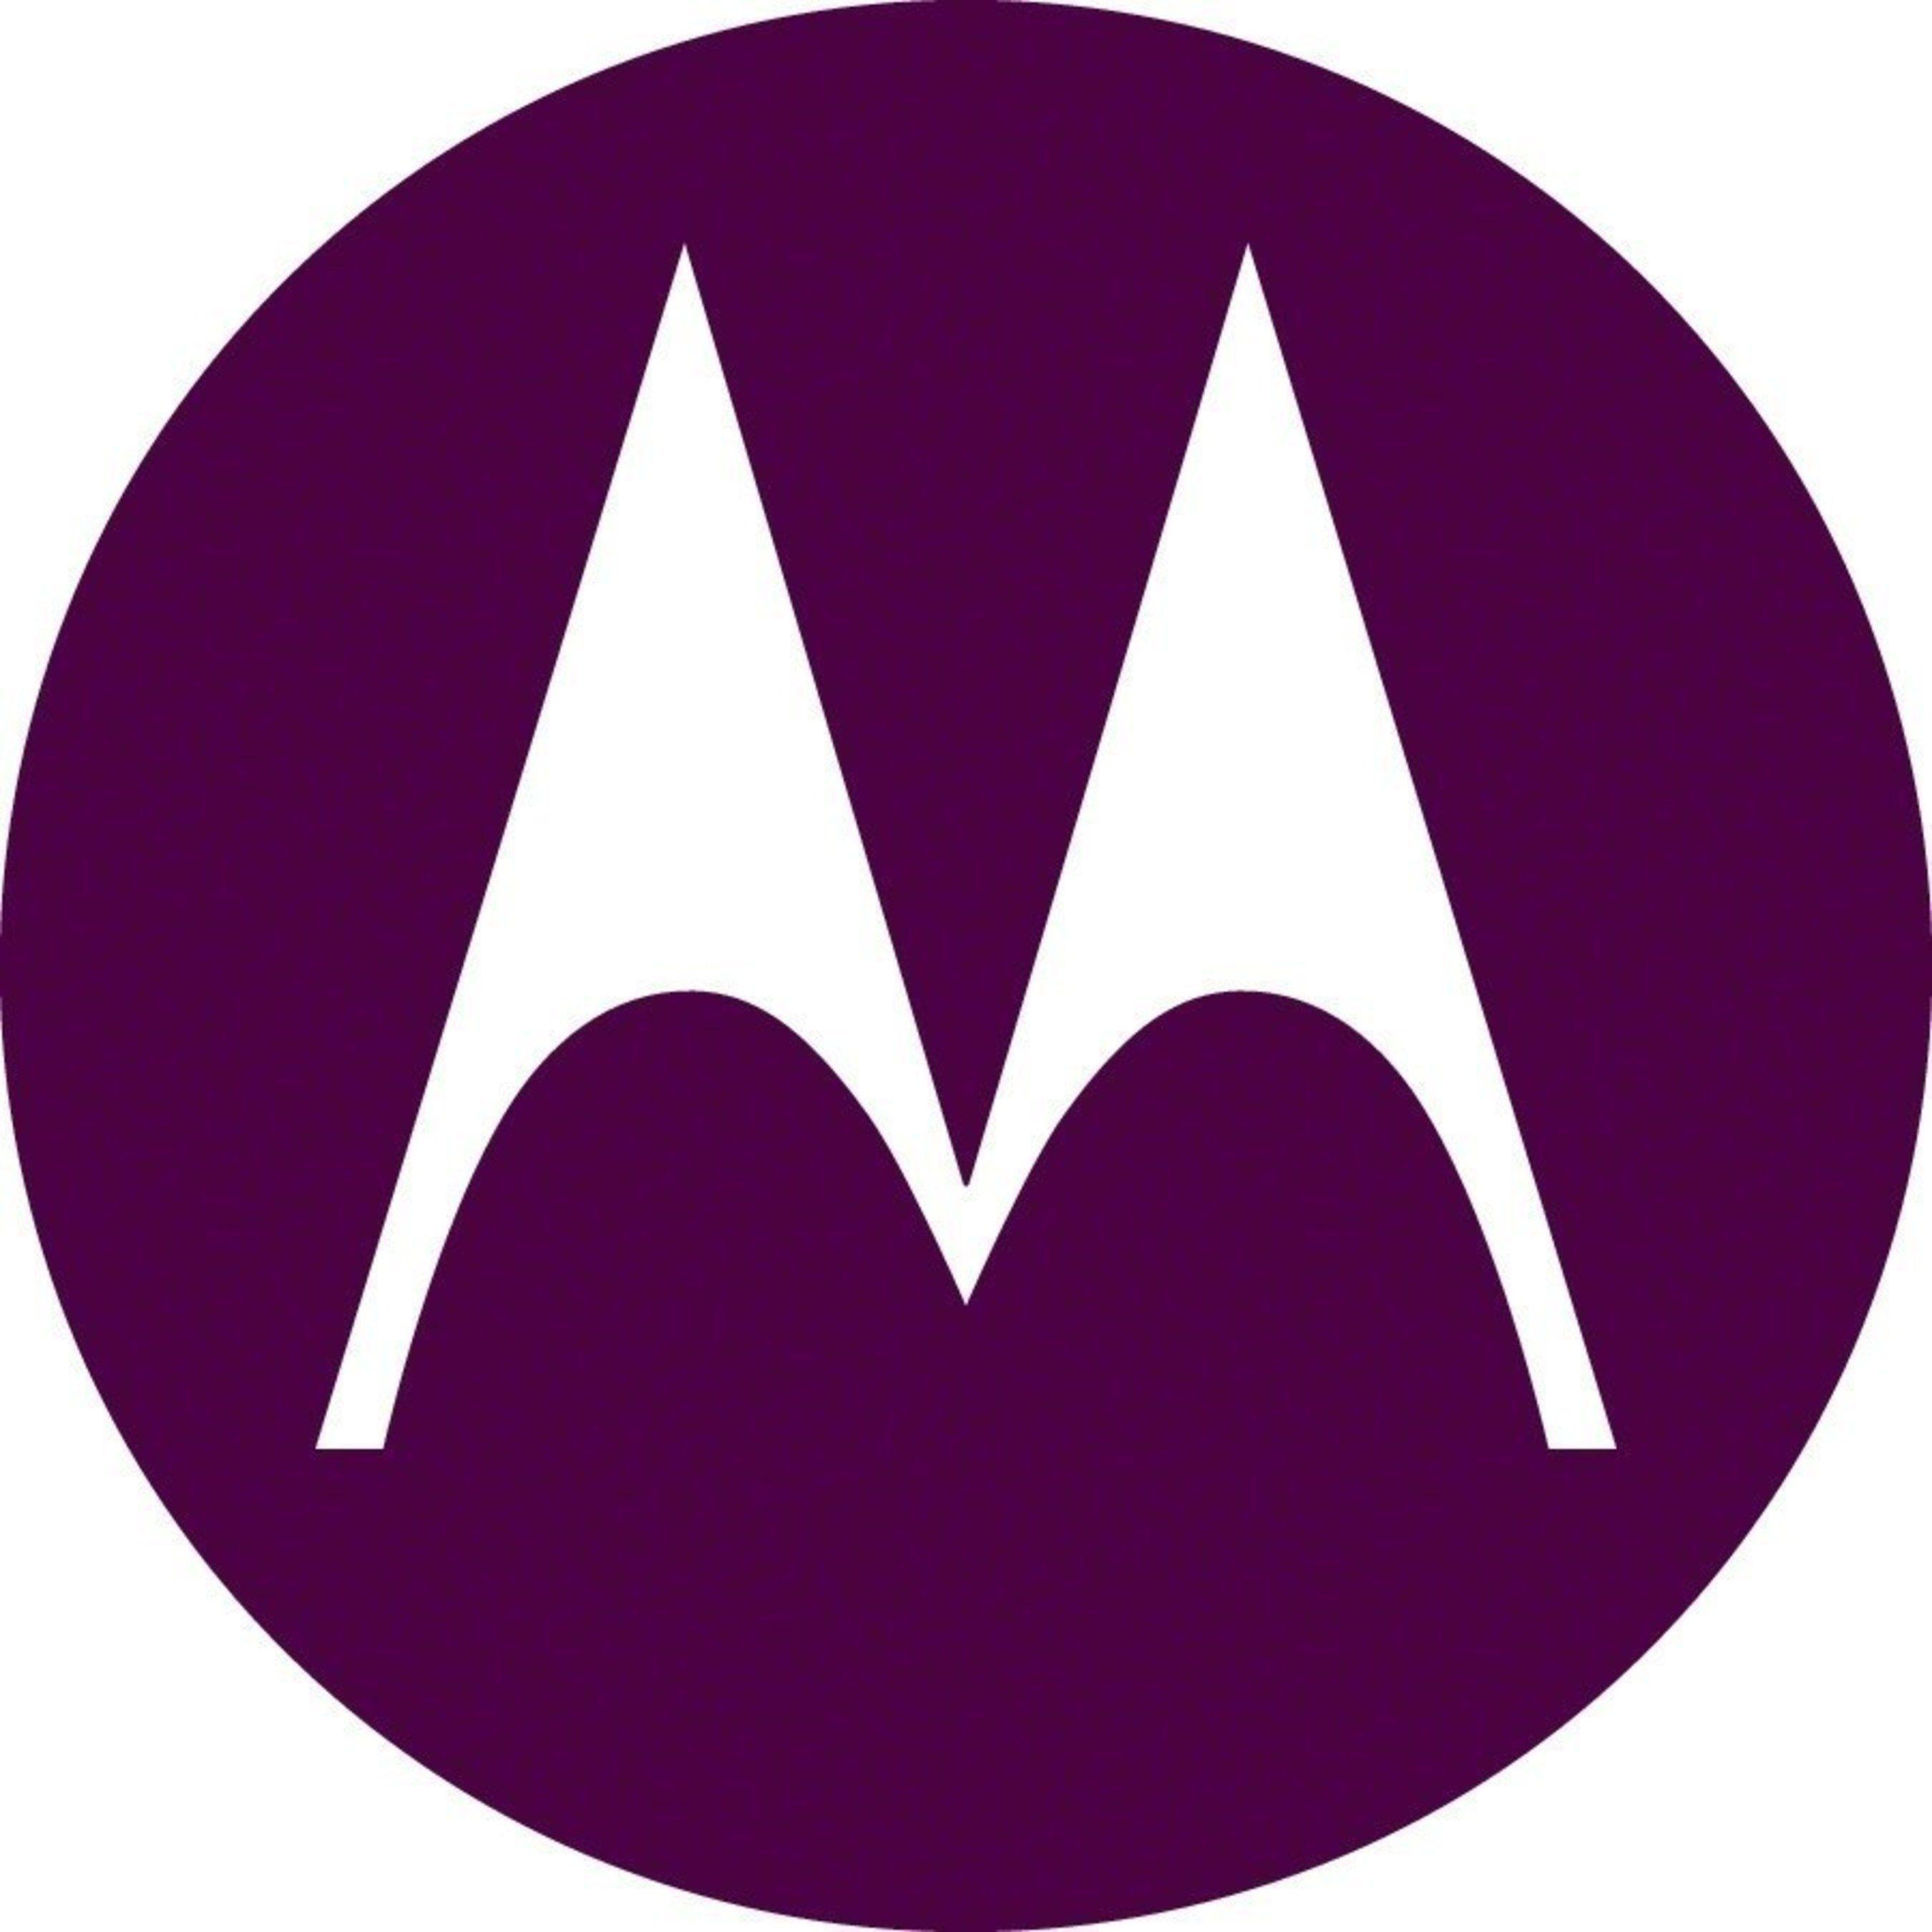 New Motorola Mobility Logo - Join Moto On The High Line And See How Your Life Will Transform In A